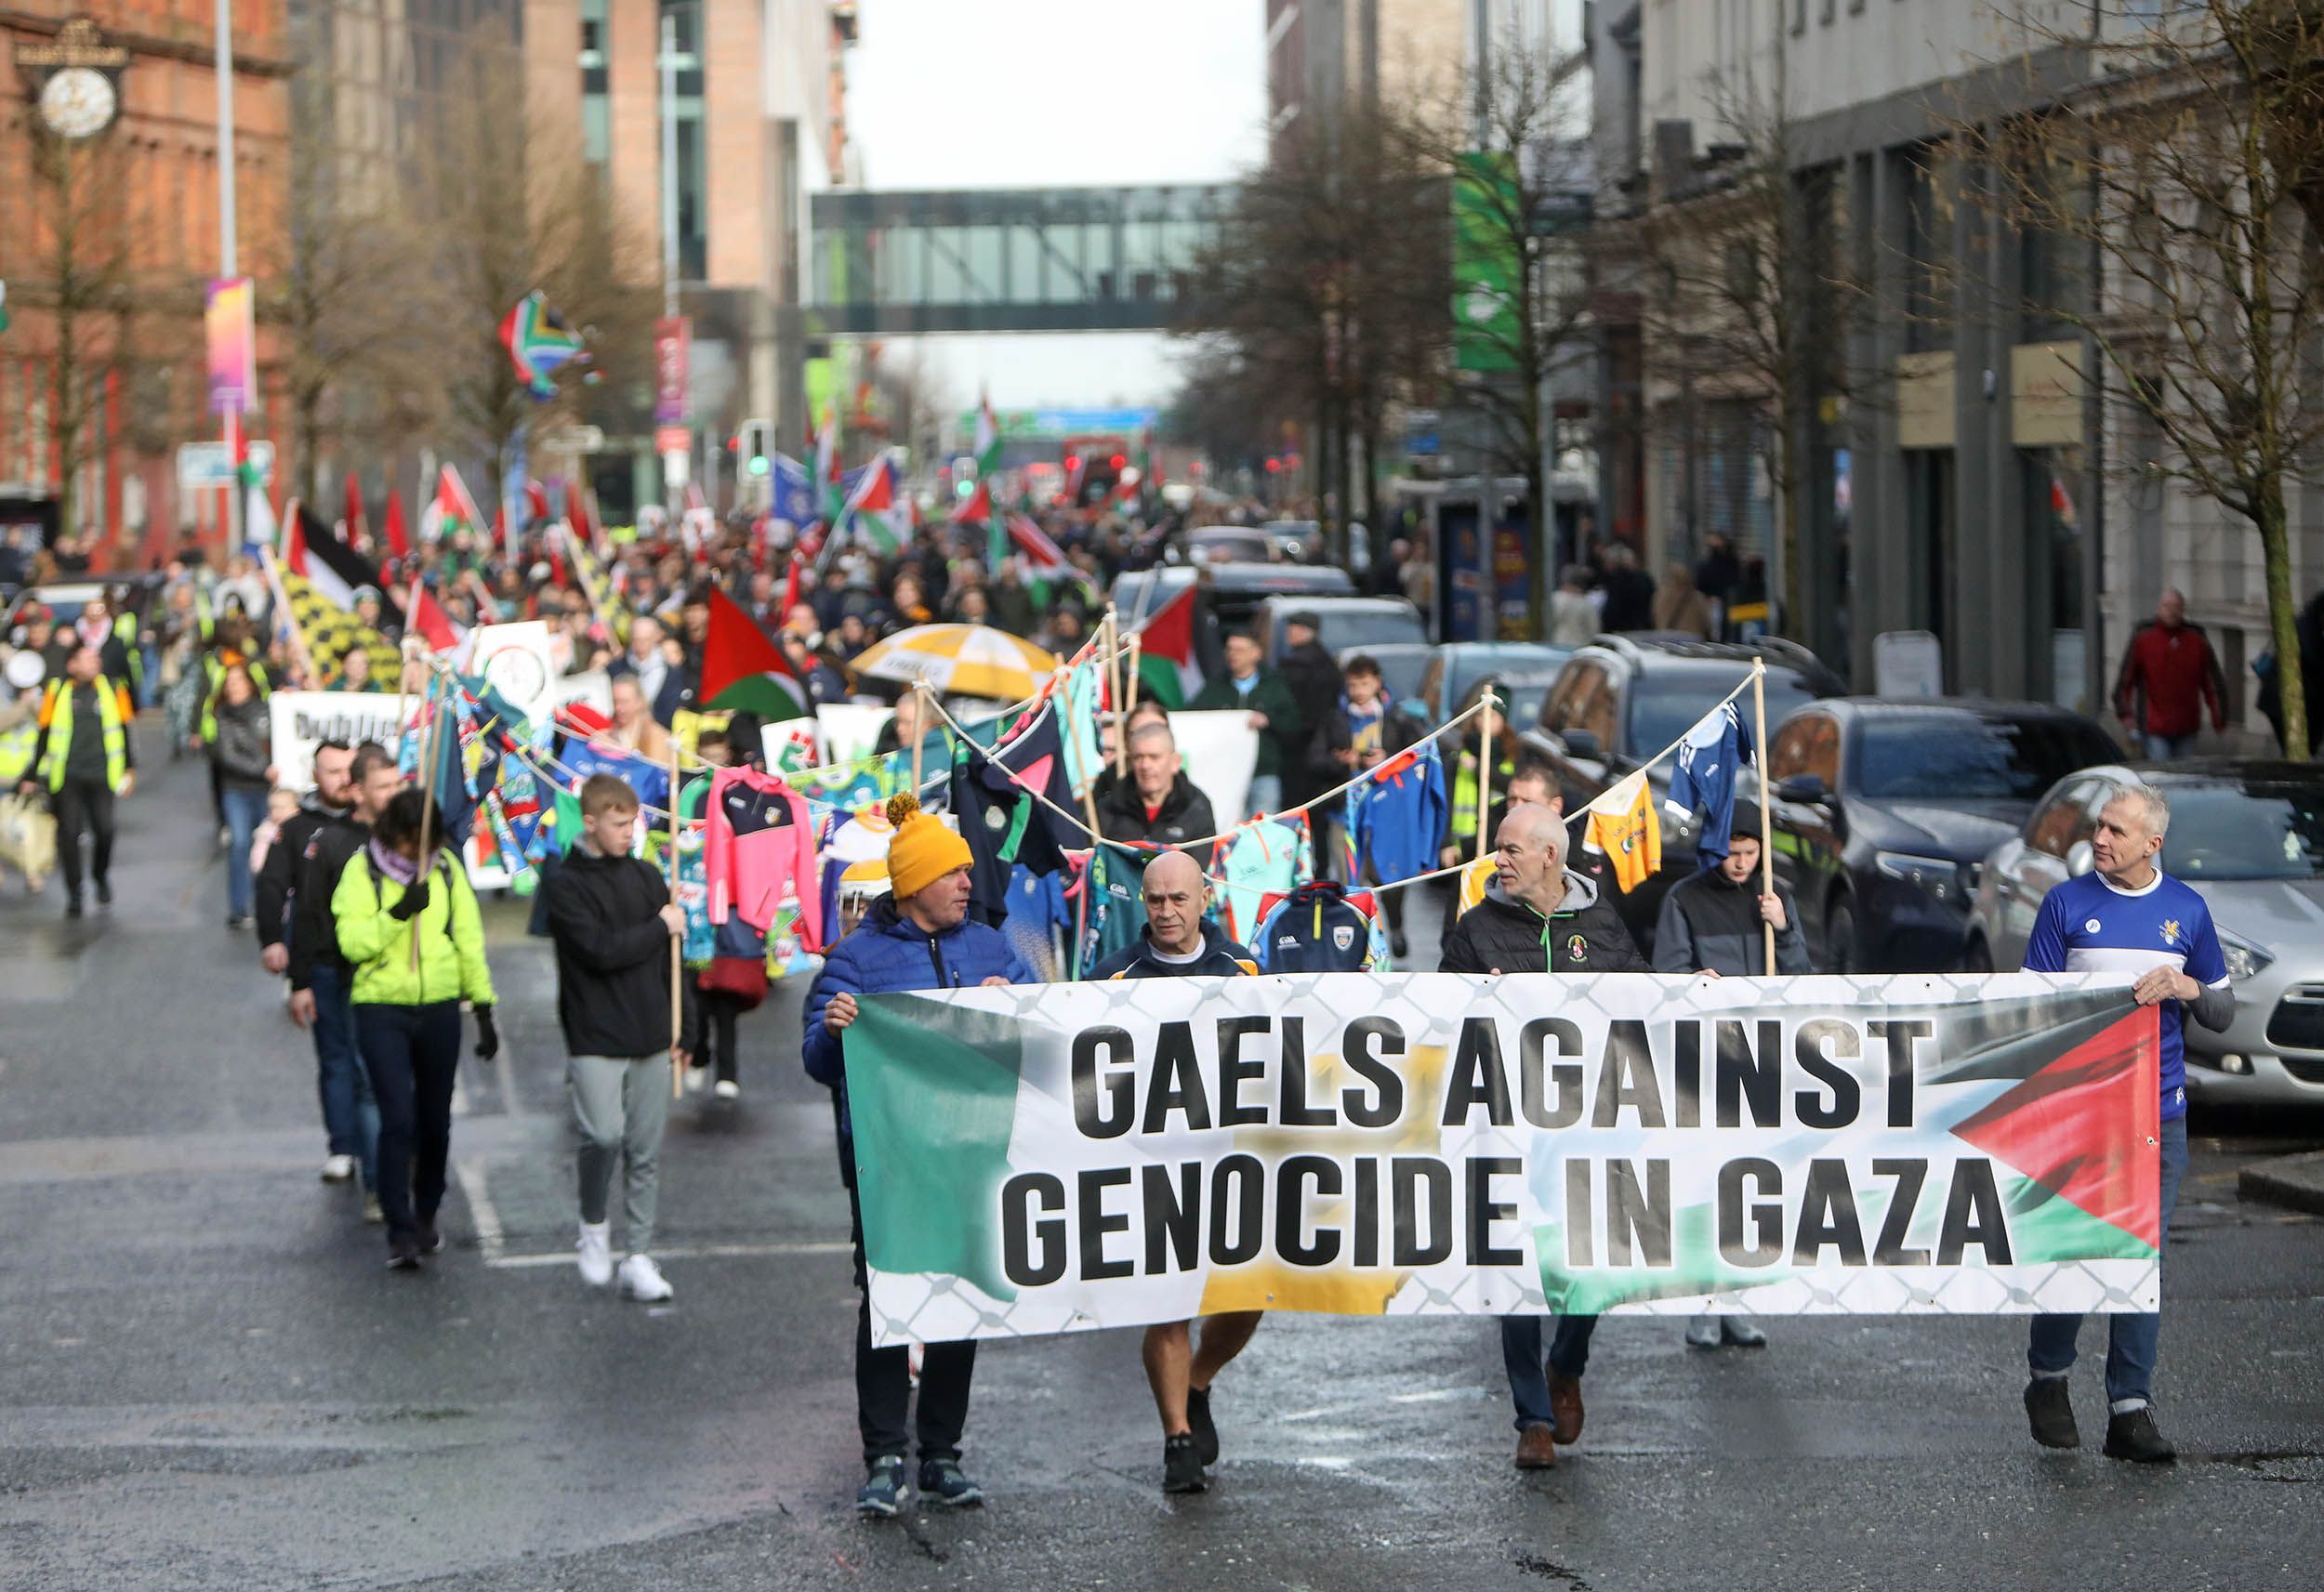 PALESTINE: Gaels Against Genocide in Gaza previously held a large demonstration at City Hall in February